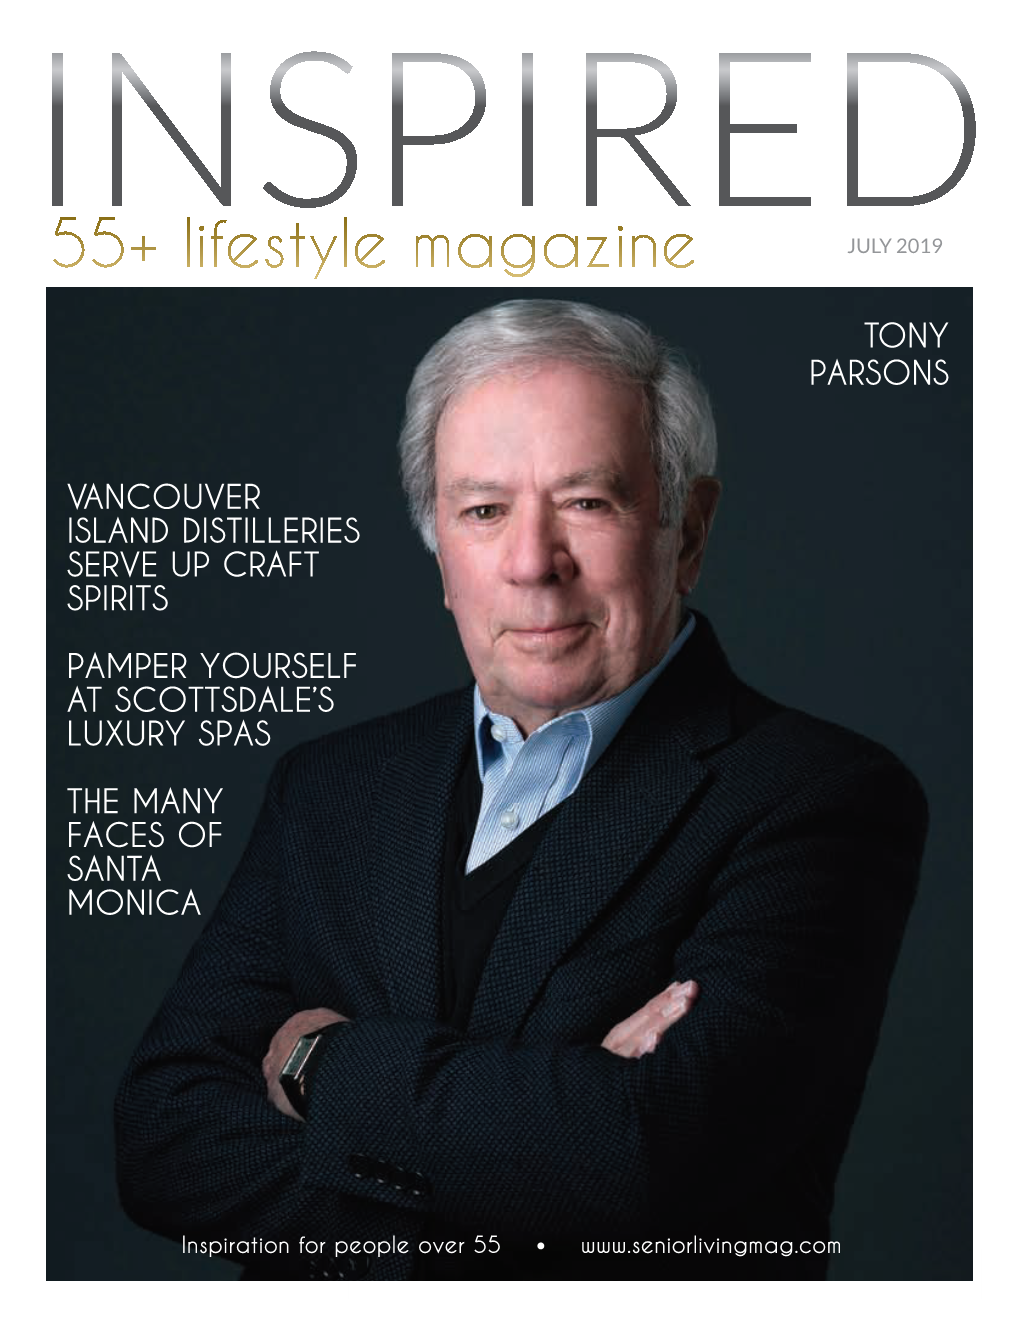 INSPIRED Magazine BC HOUSING DIRECTORY • Search for 55+ Housing Online • Compare Features & Pricing • Get Quick Response from Properties • Book Tours Easily